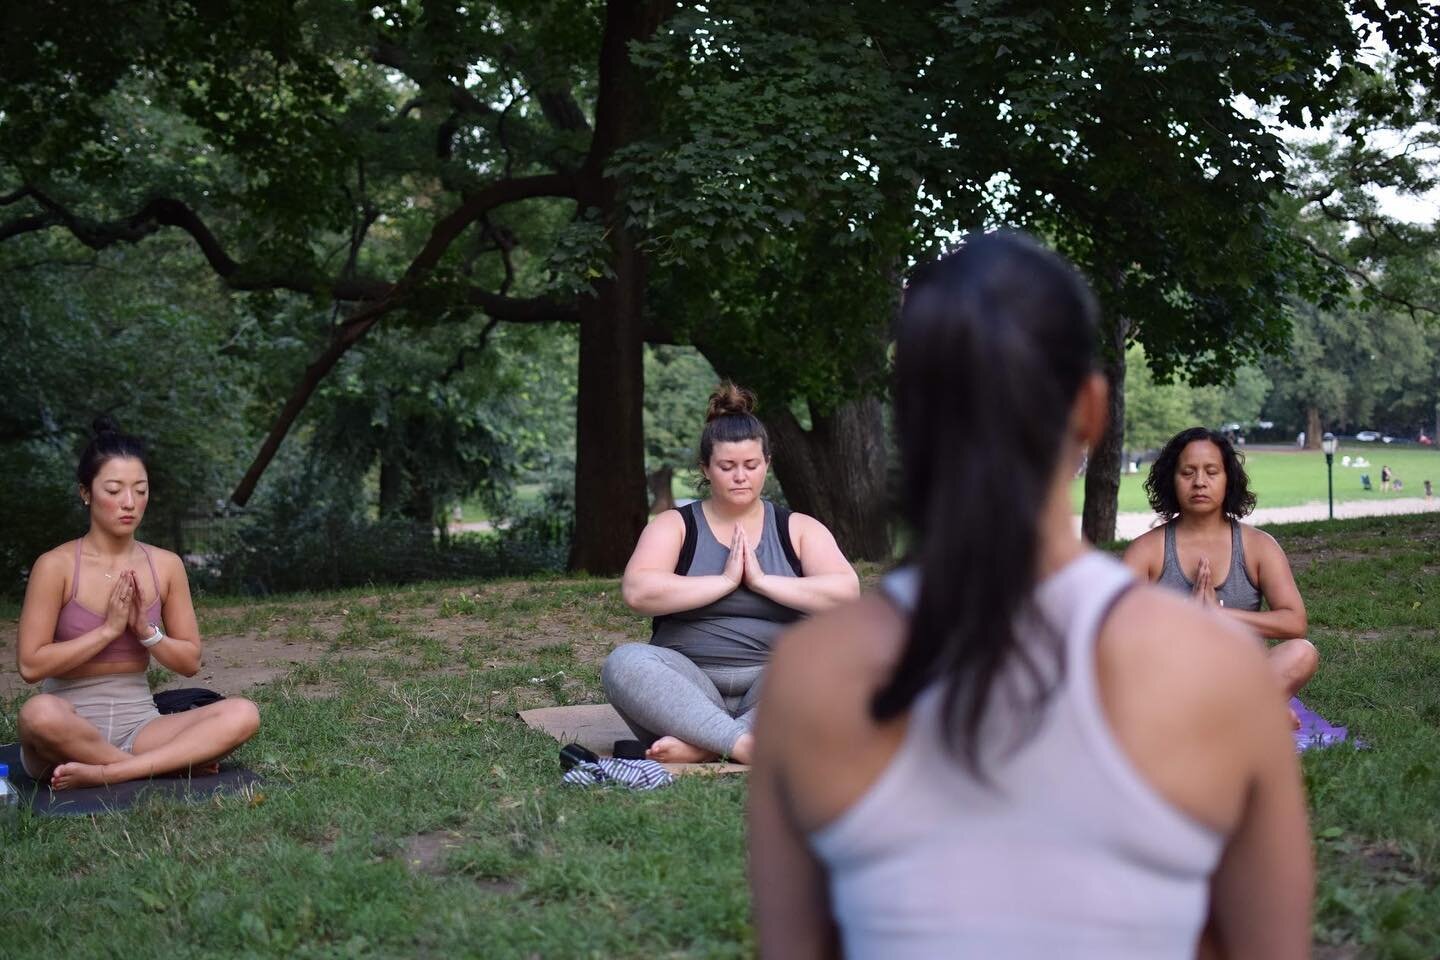 Breaks.

Are so crucial to our happiness. To preventing burnout. To feeling energized. 

Reminder: to pause today and take breaks. You&rsquo;ll be more productive for it. Promise 

Also- who here is down for some In-Person *yay* Yoga in the Park this